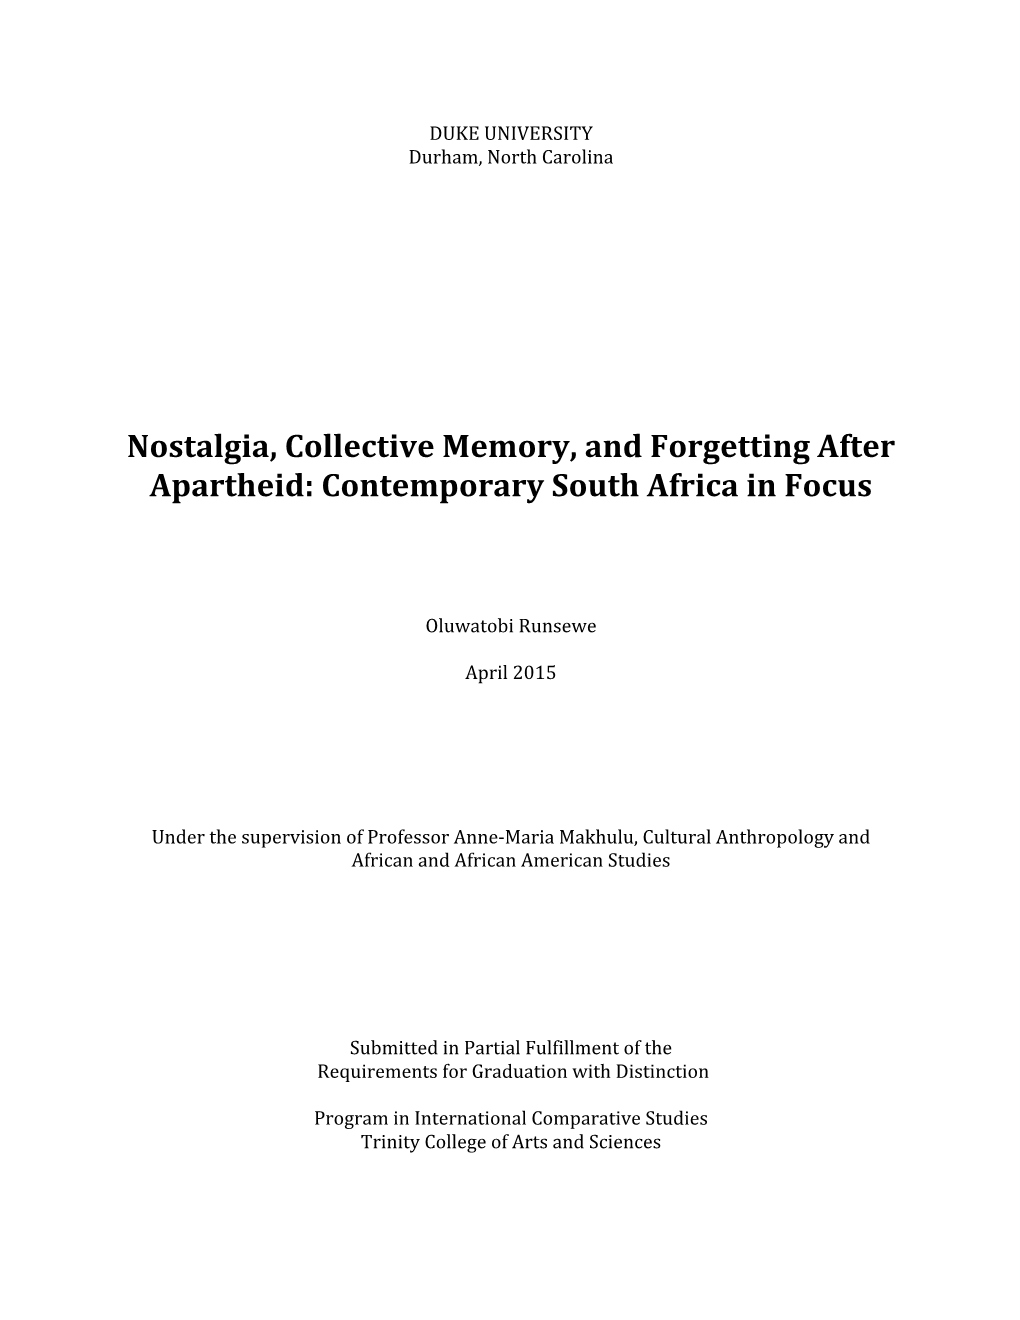 Nostalgia, Collective Memory, and Forgetting After Apartheid: Contemporary South Africa in Focus